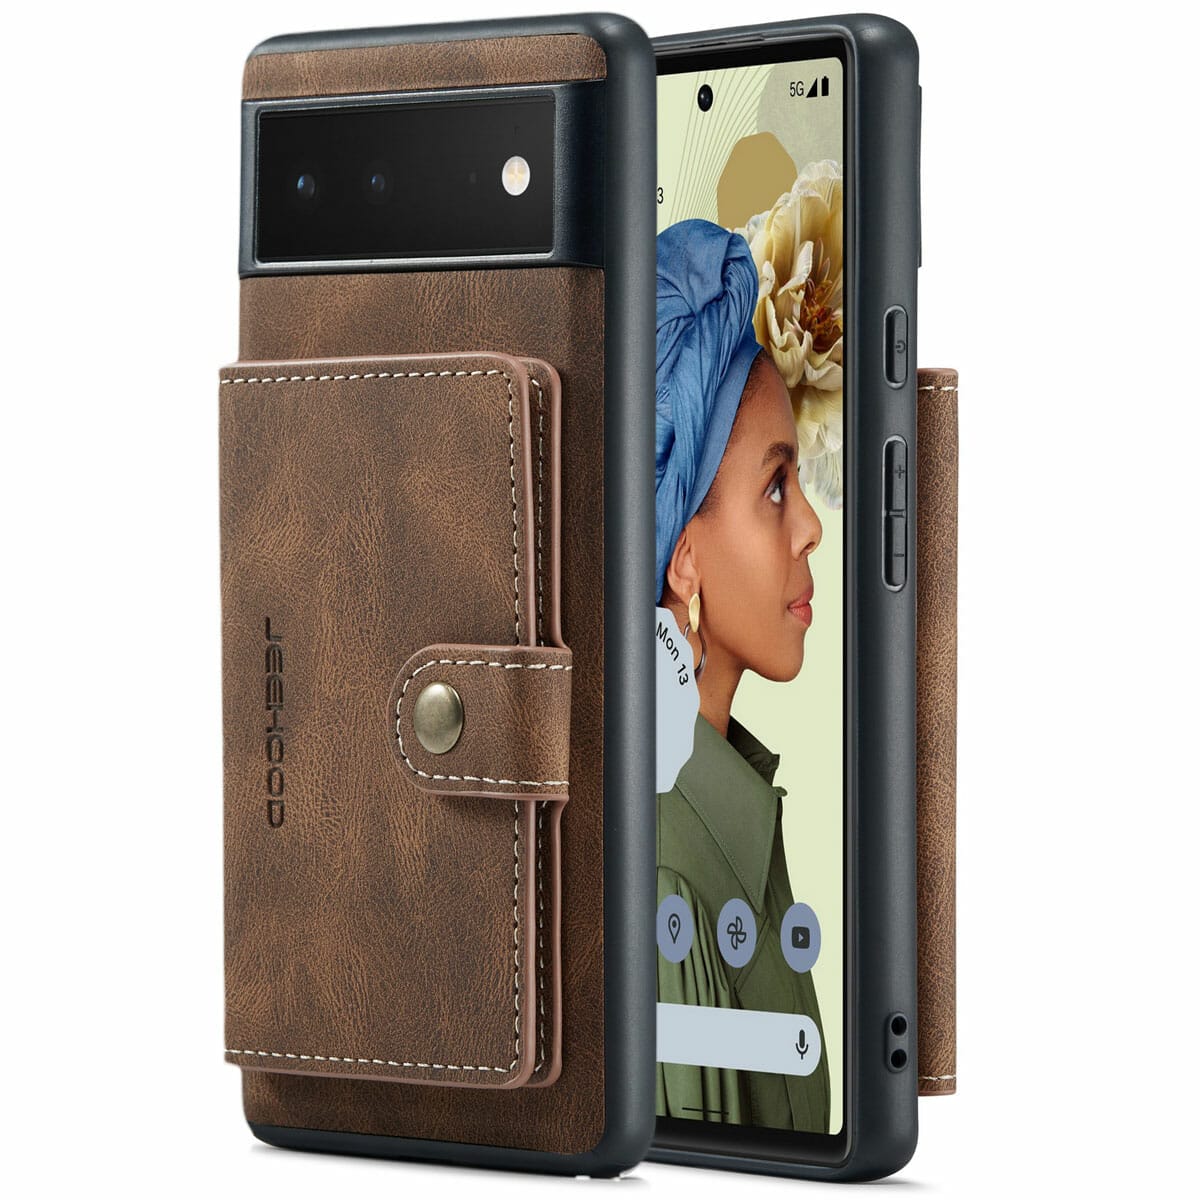 Leather Wallet Case For Google Pixel 5 and 6 Series 1